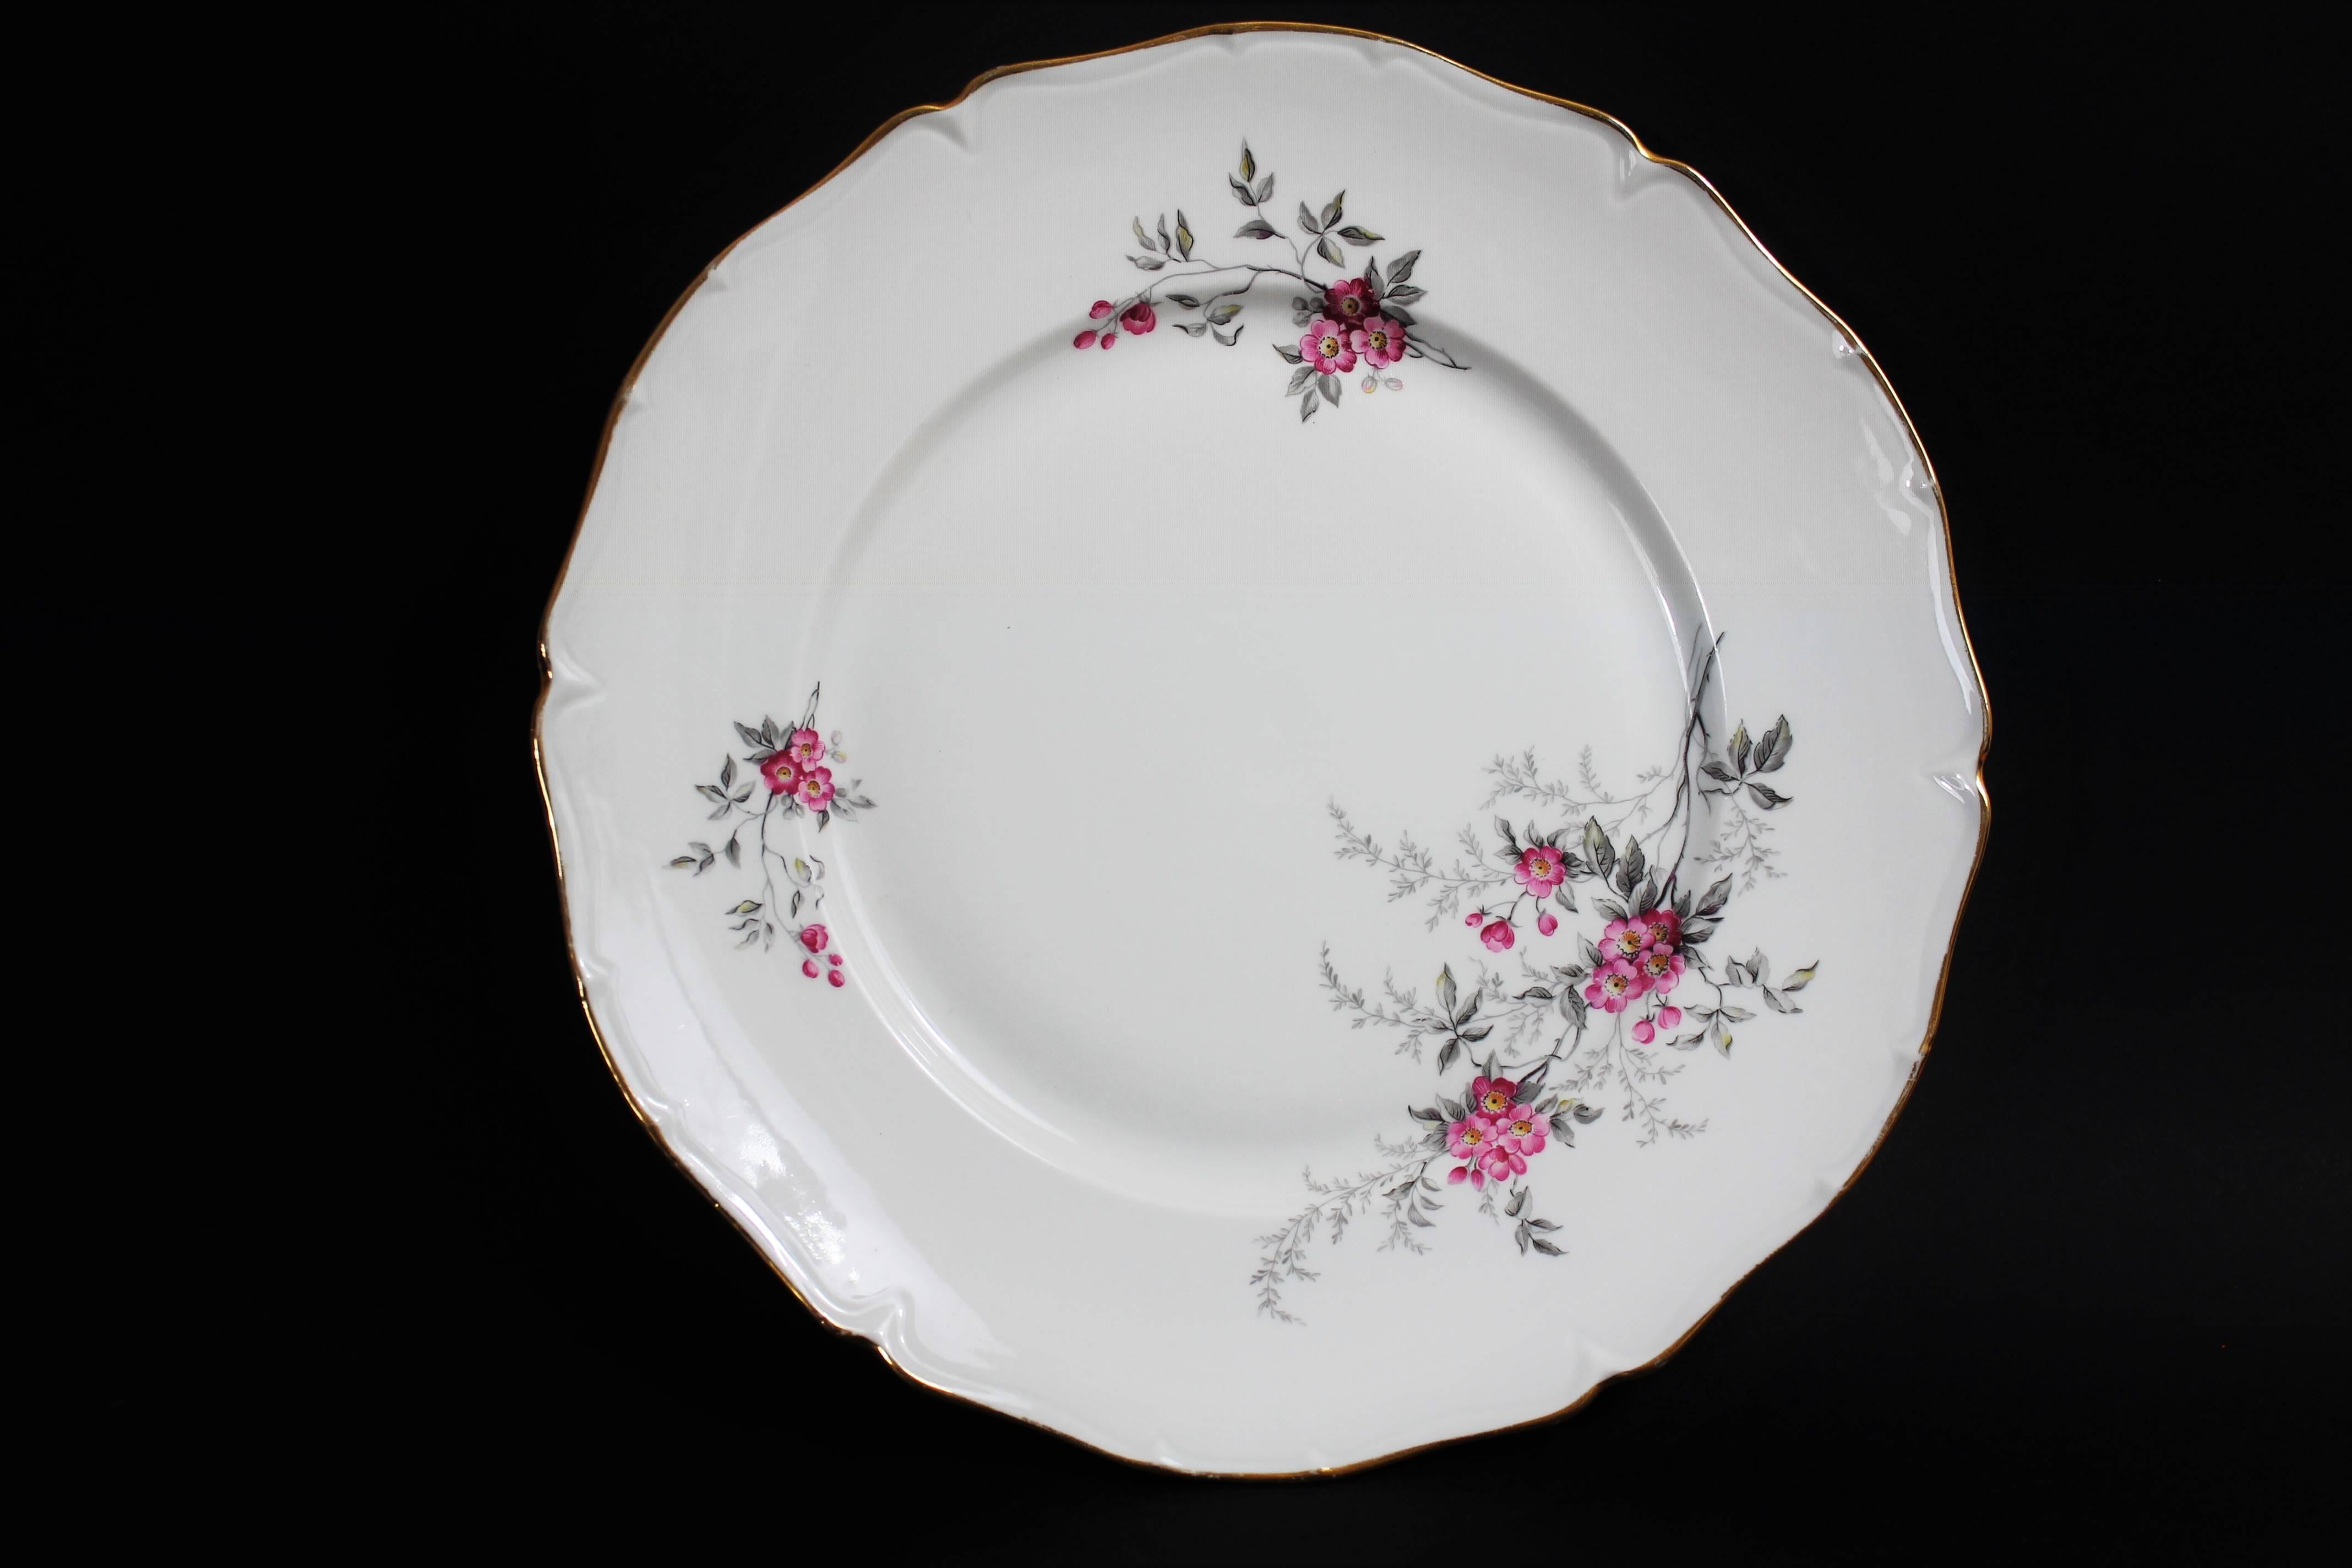 Beautiful Limoges porcelain tableware with floral decoration and gilding comprising 56 pieces:
24 flat plates, 10 small plates, 12 soup plates, one soup tureen or vegetable dish , one round dishes, one oval dish, one saucier, two ramekins, one fruit